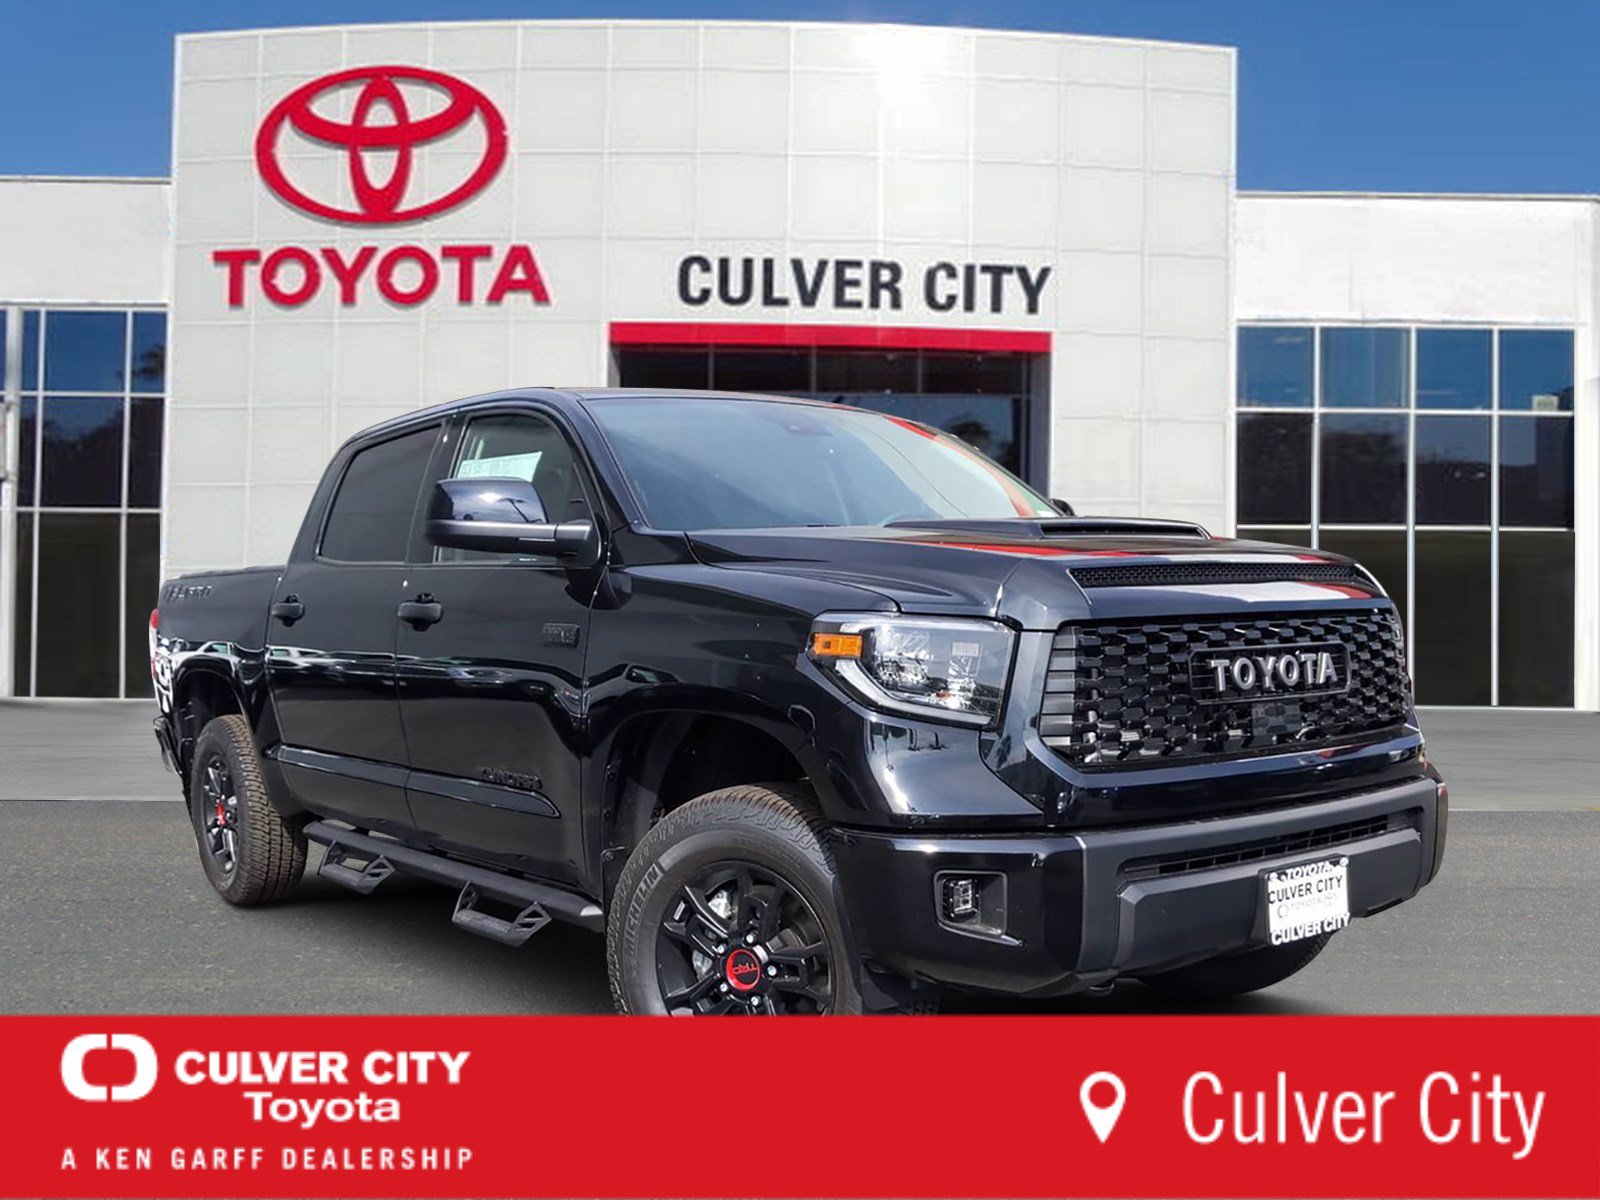 New 2020 Toyota Tundra 4wd Trd Pro Crewmax In Culver City 24112